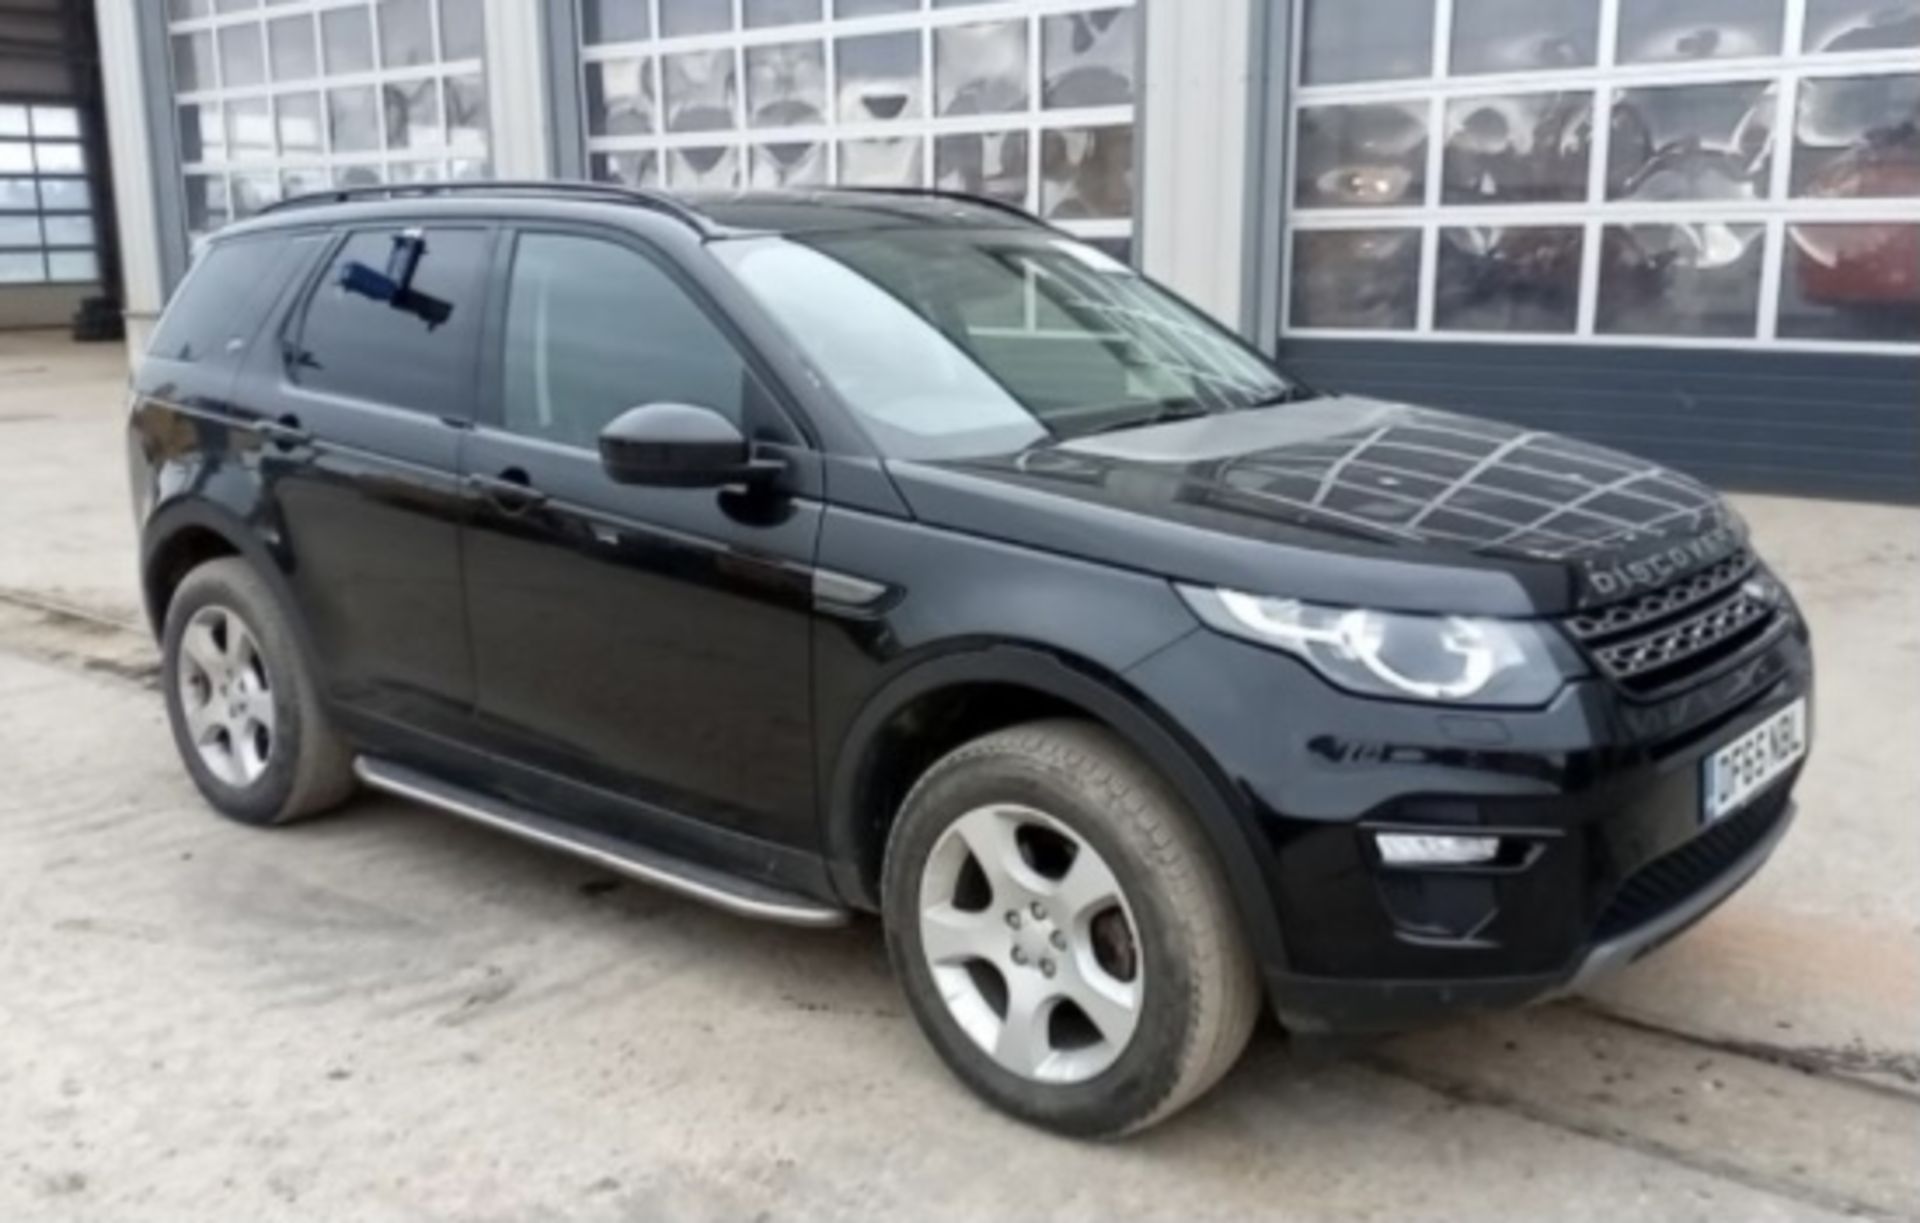 2015 LAND ROVER DISCOVERY SPORT SE TECH TD4.LOCATION NORTHERN IRELAND.